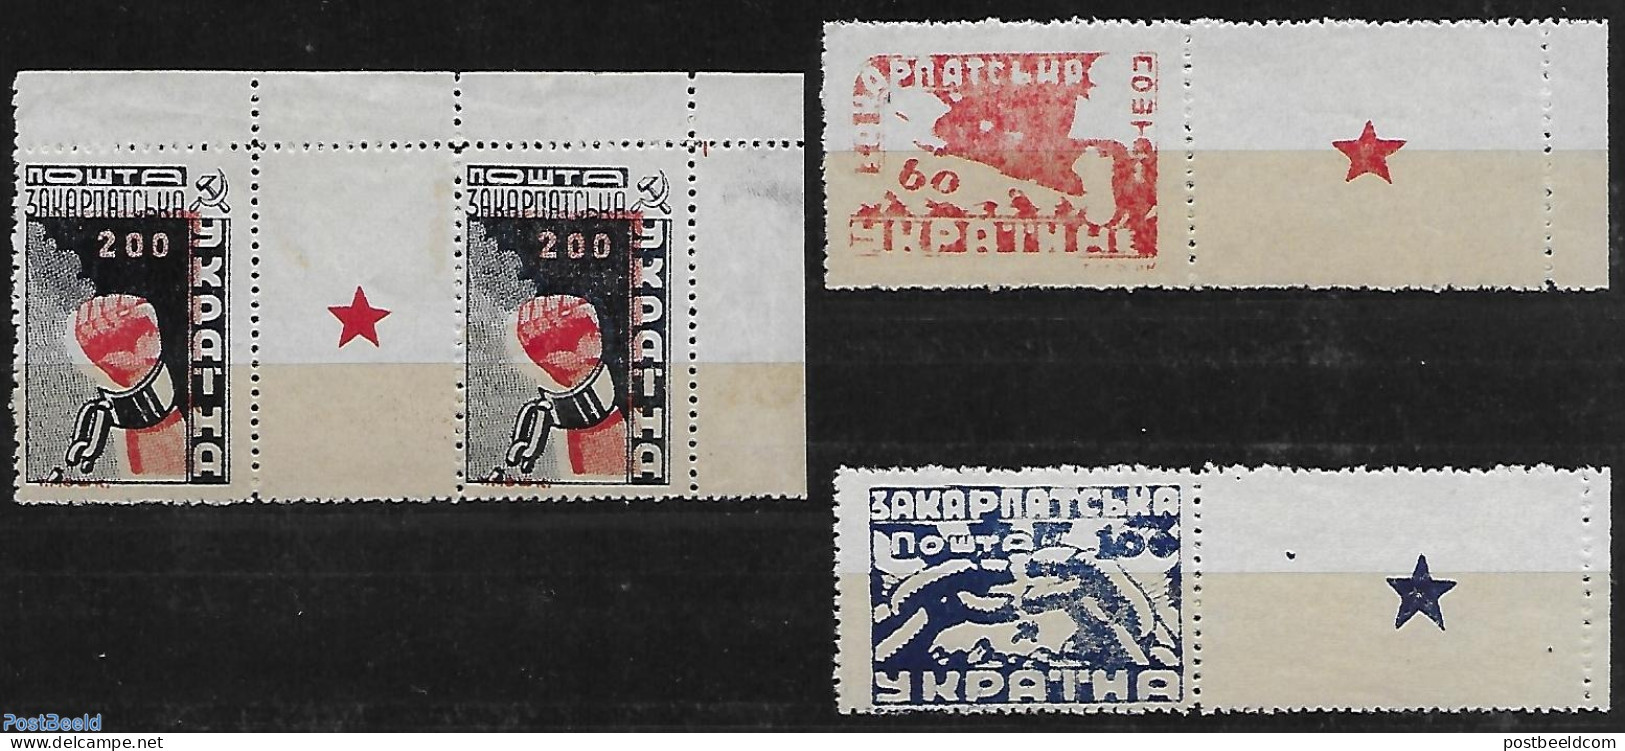 Ukraine 1945 With Decorative Field, Mint NH, Various - Errors, Misprints, Plate Flaws - Oddities On Stamps